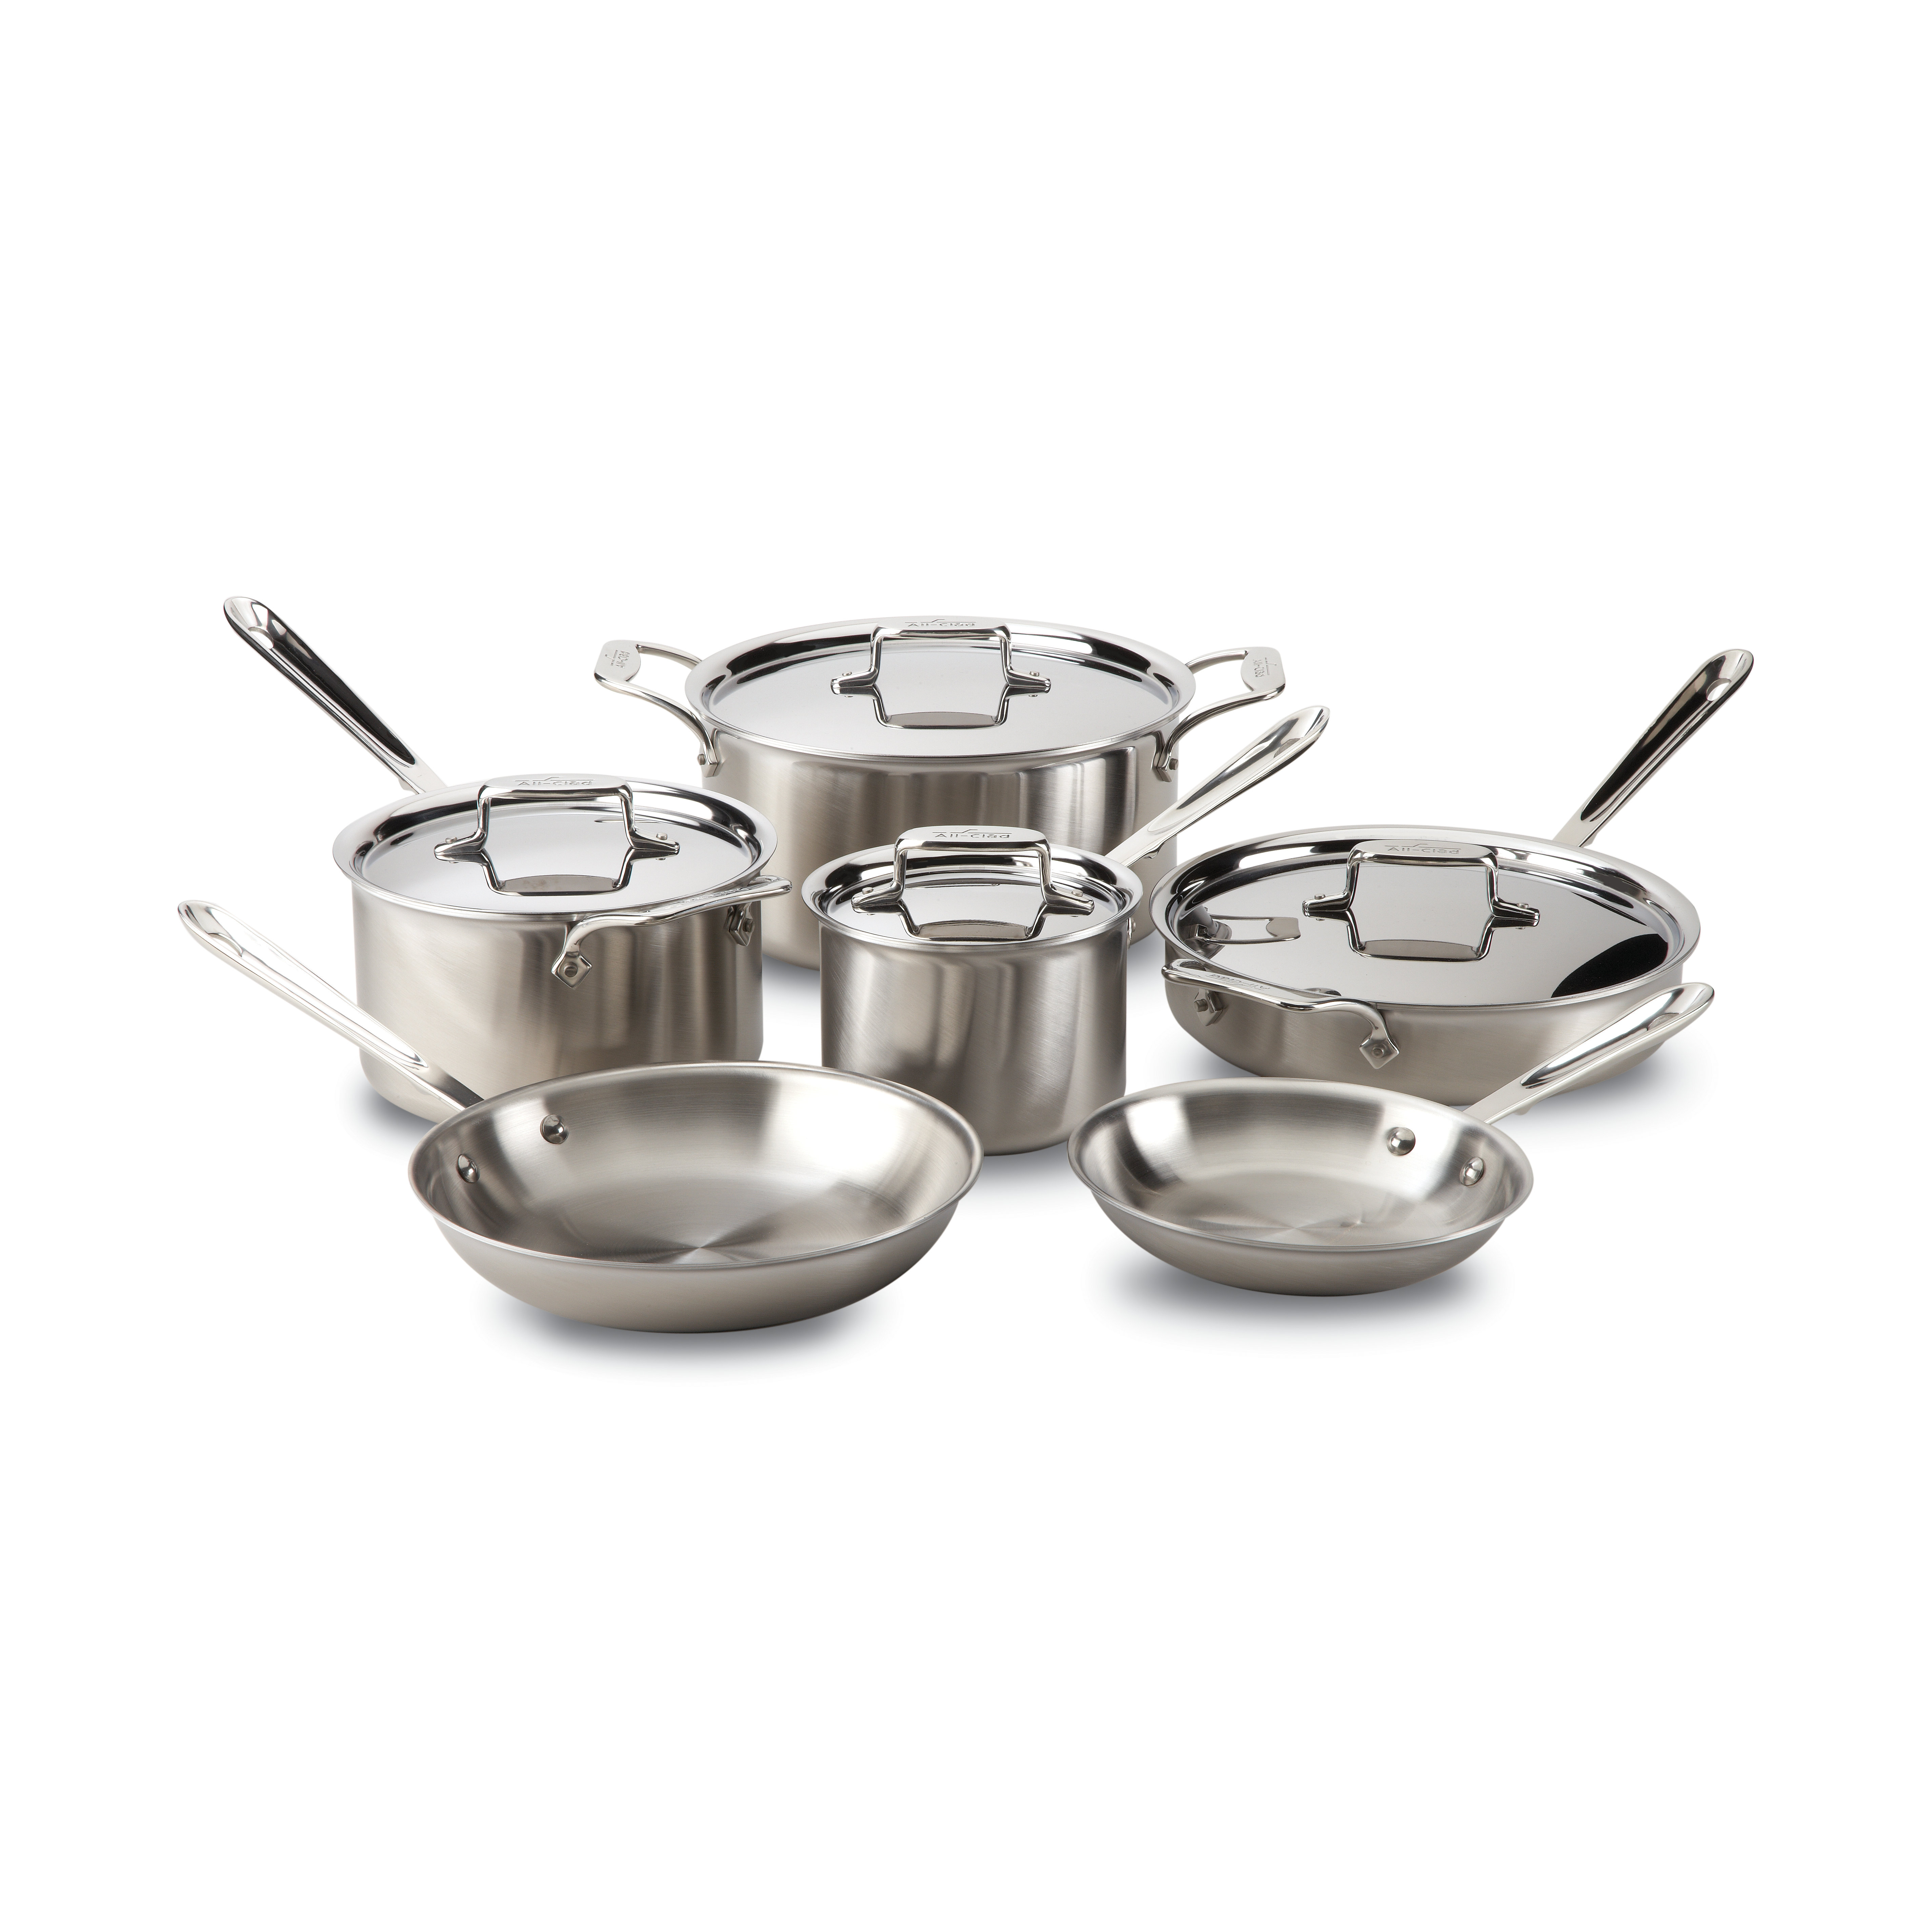 All-Clad d5 Brushed Stainless Steel 10 Piece Cookware Set & Reviews D5 Brushed Stainless Steel 10 Pc Cookware Set